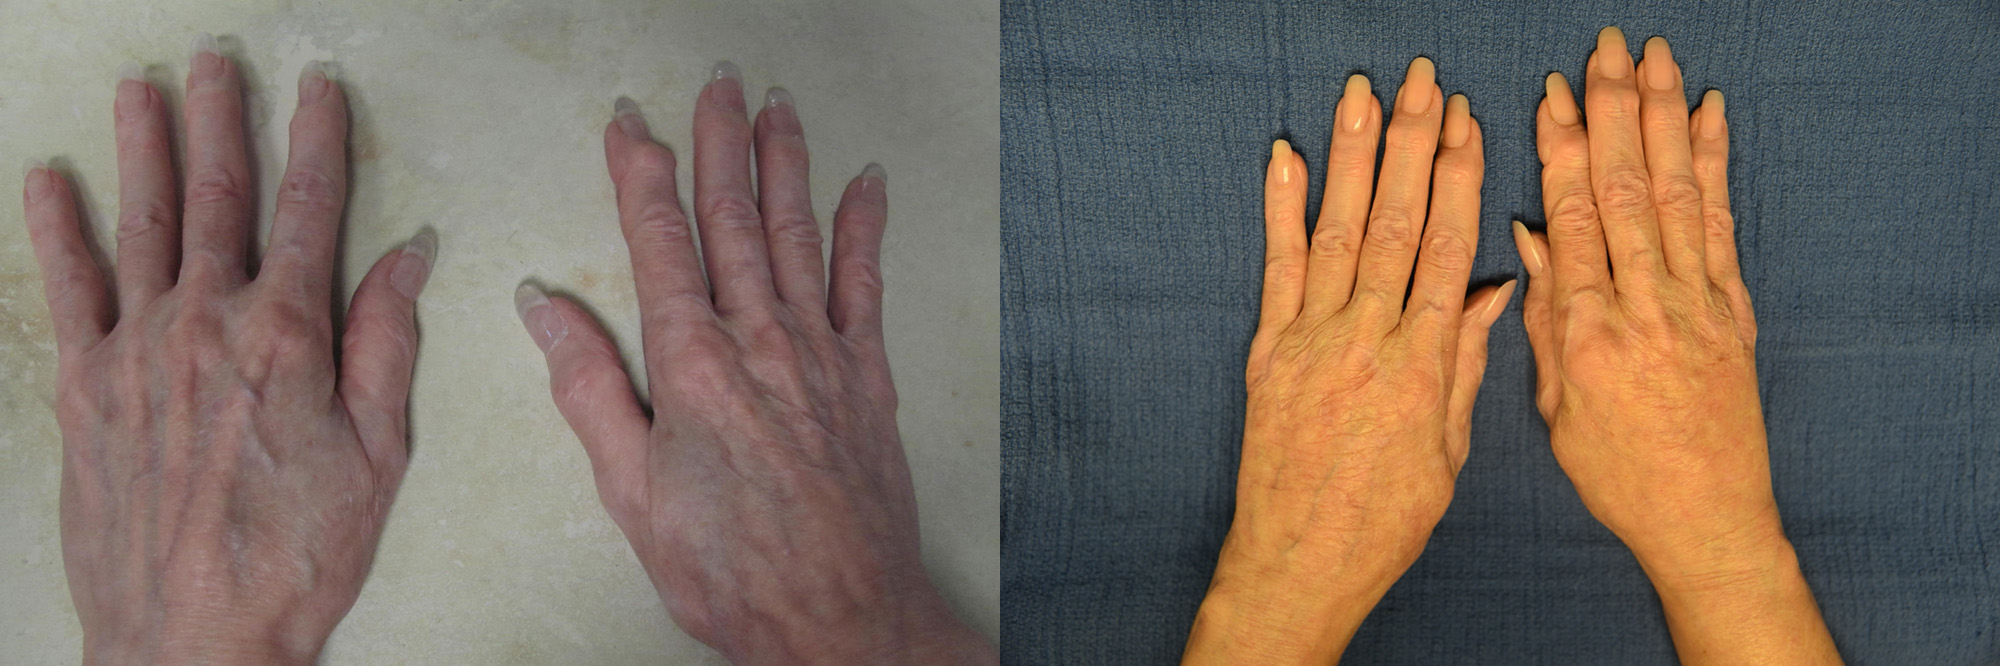 Fat Transfer Before and After Photo by Dr. Leveque of Gulf Coast Plastic Surgery in Pensacola, FL